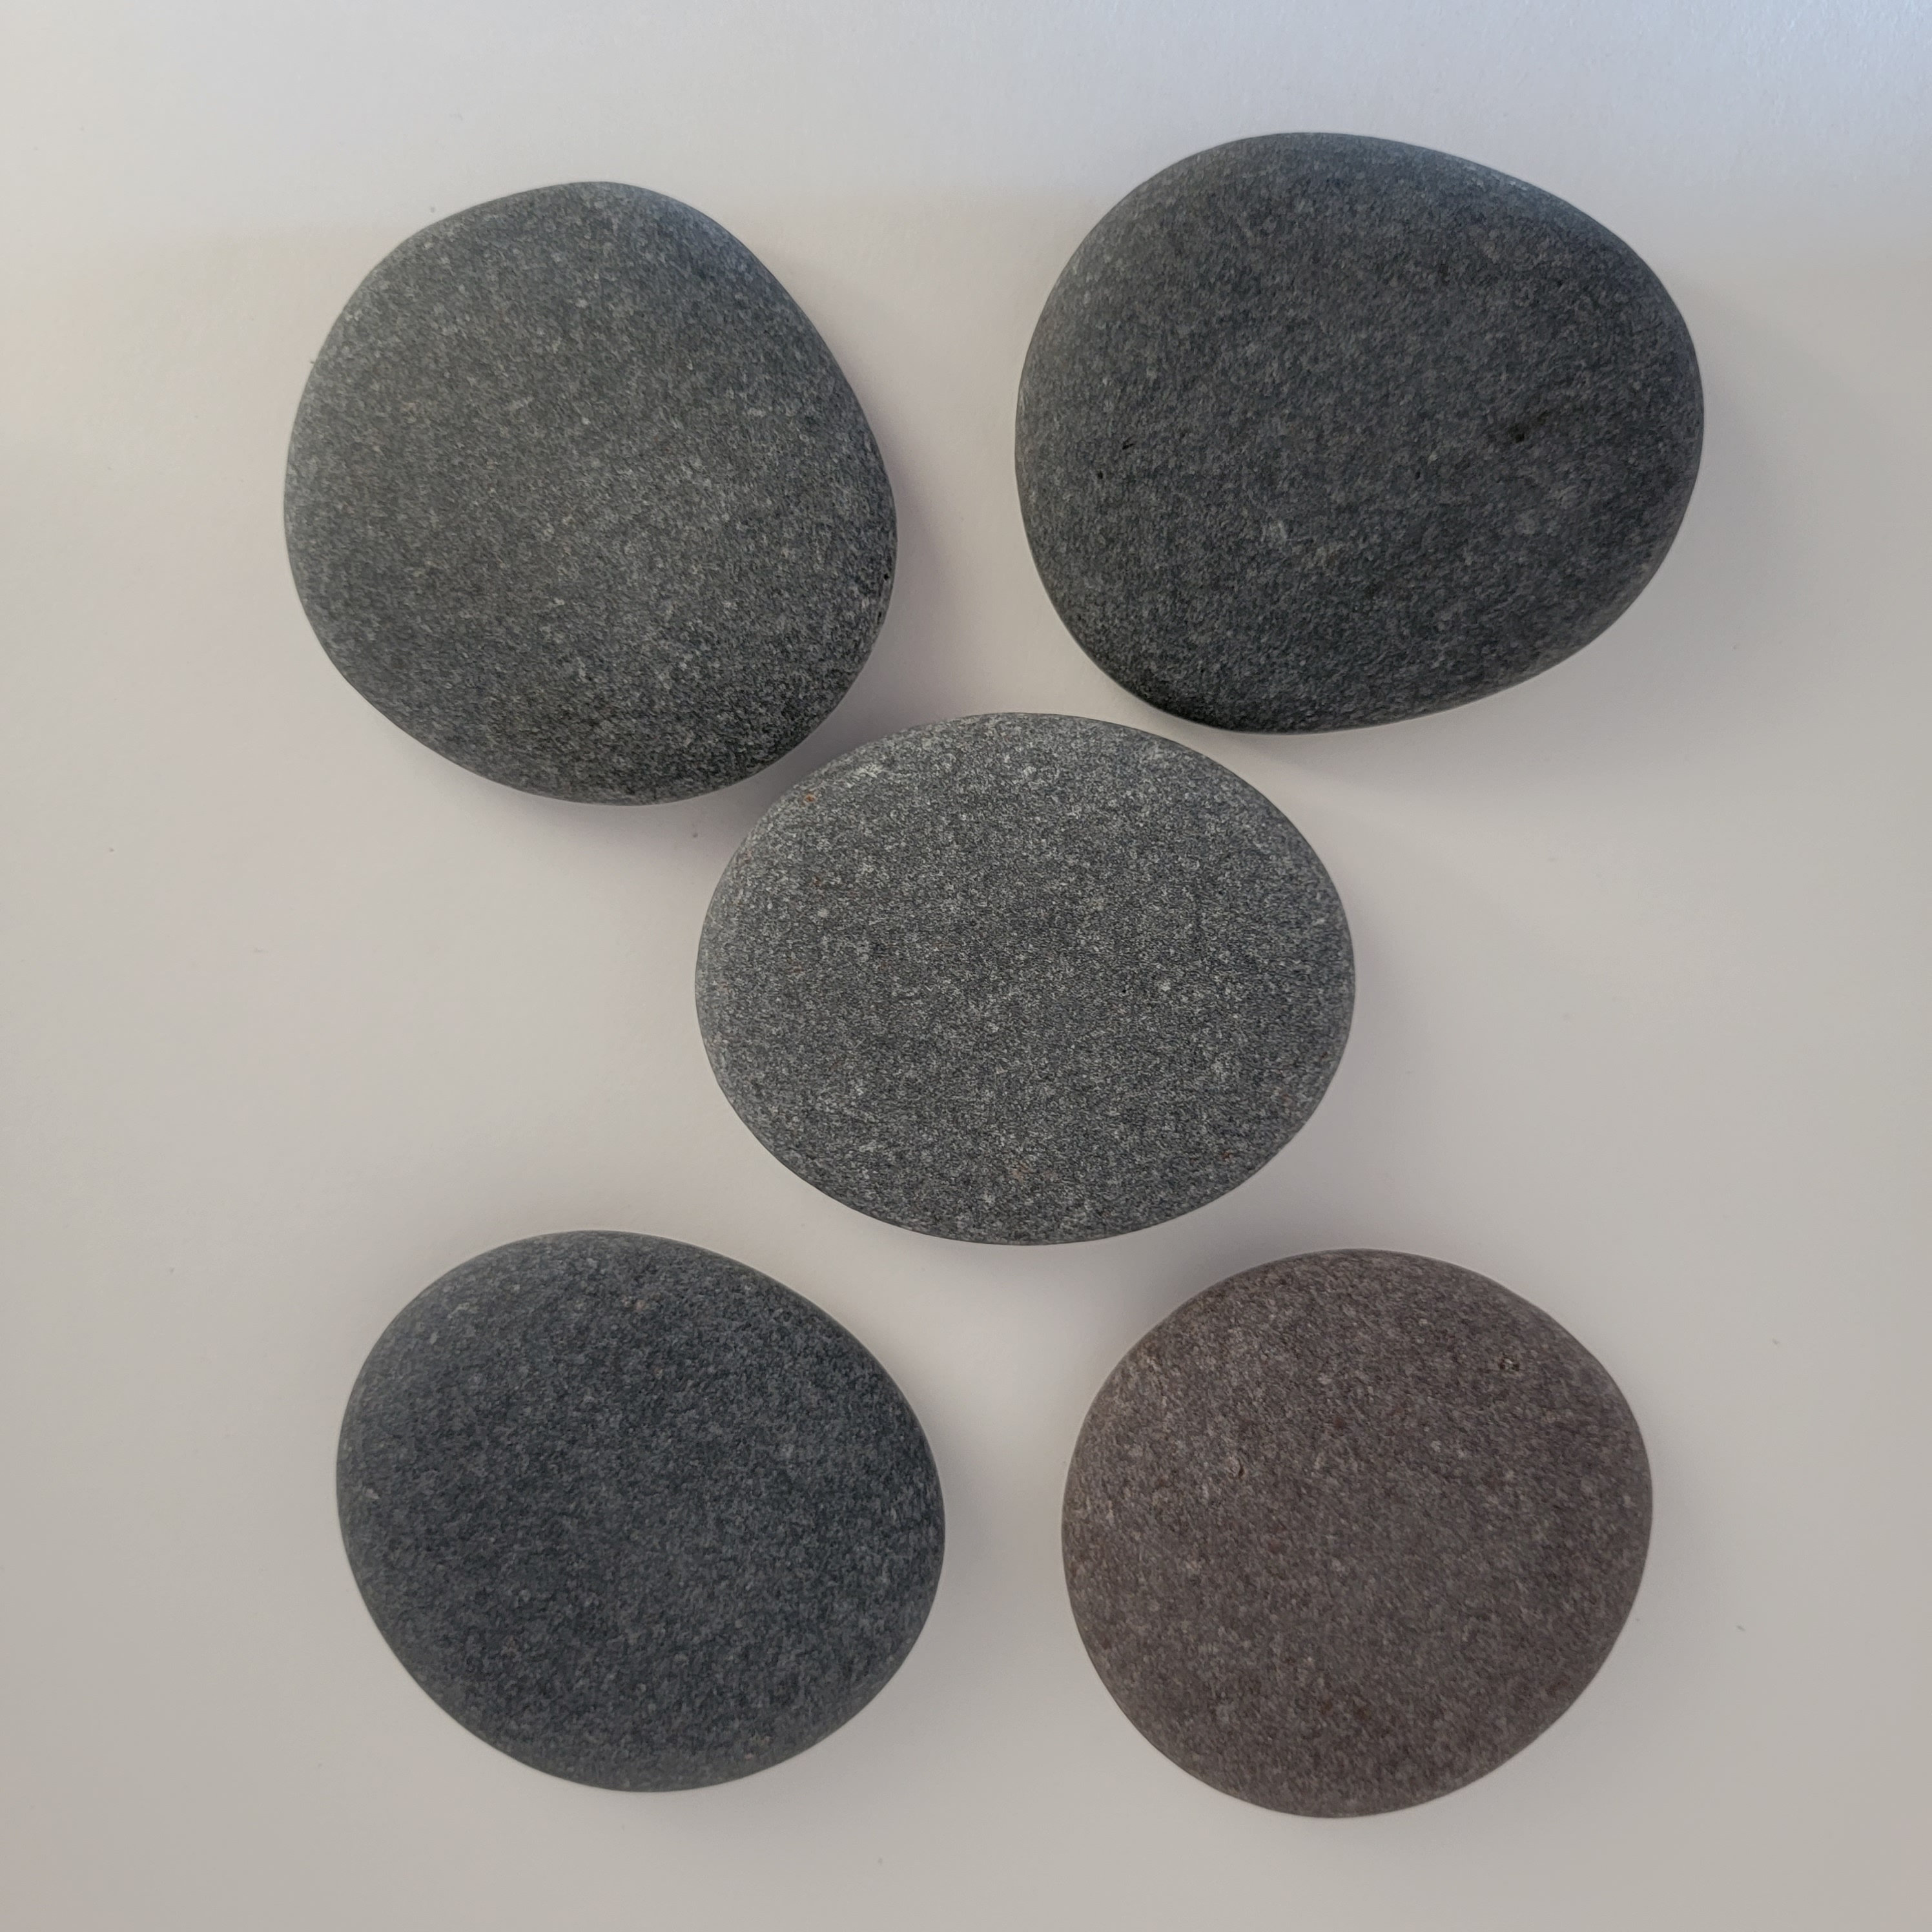 10 Rocks for Painting, Flat and Smooth Painting Rocks About 2